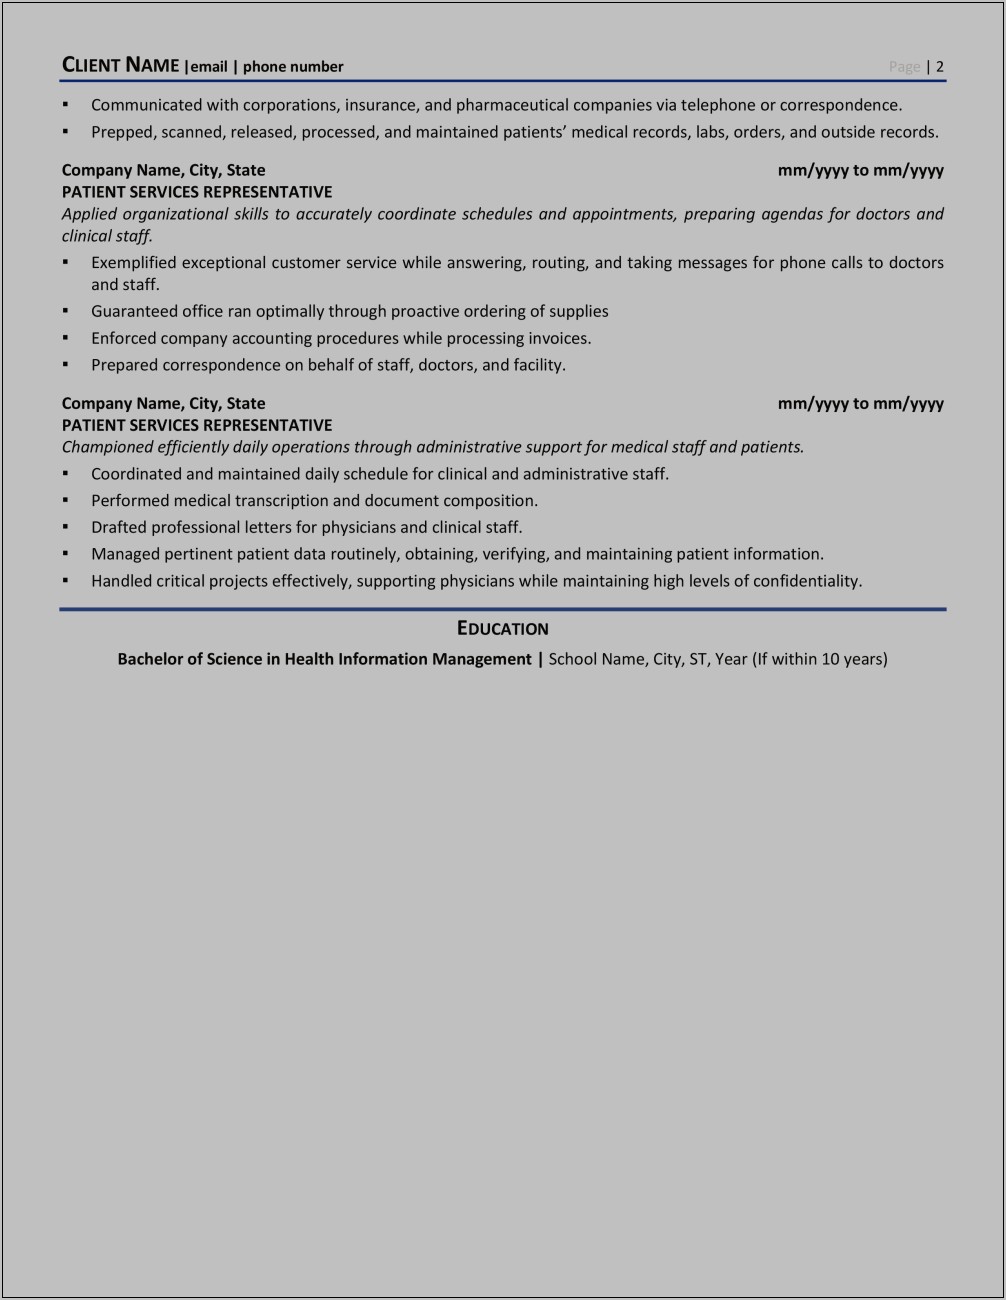 Lab Dumentation And Record Specialist Resume Samples